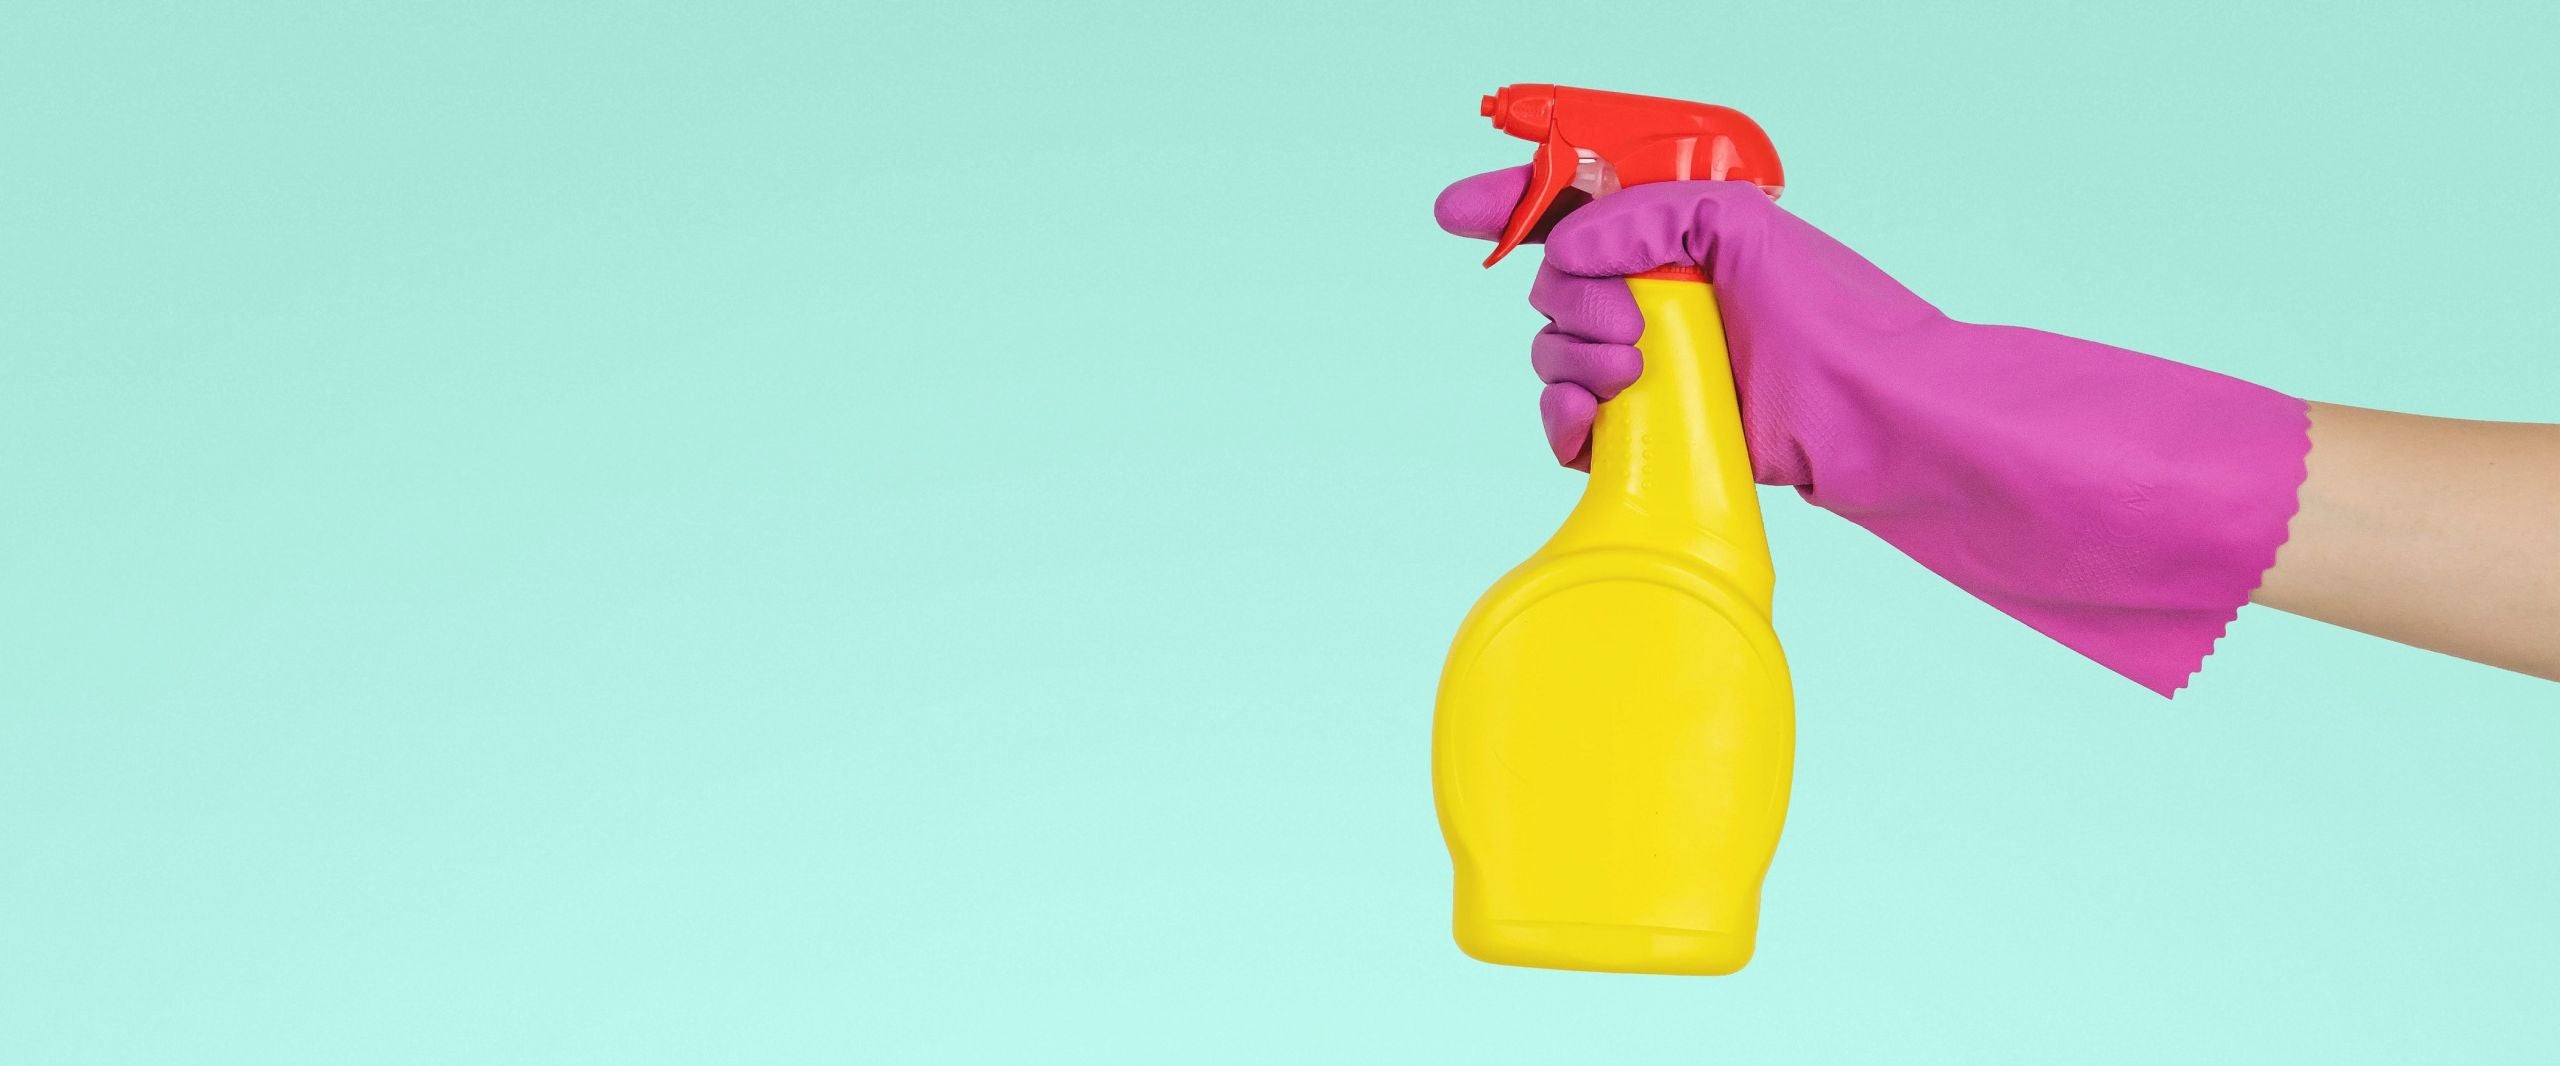 how to clean your dishwasher spray bottle